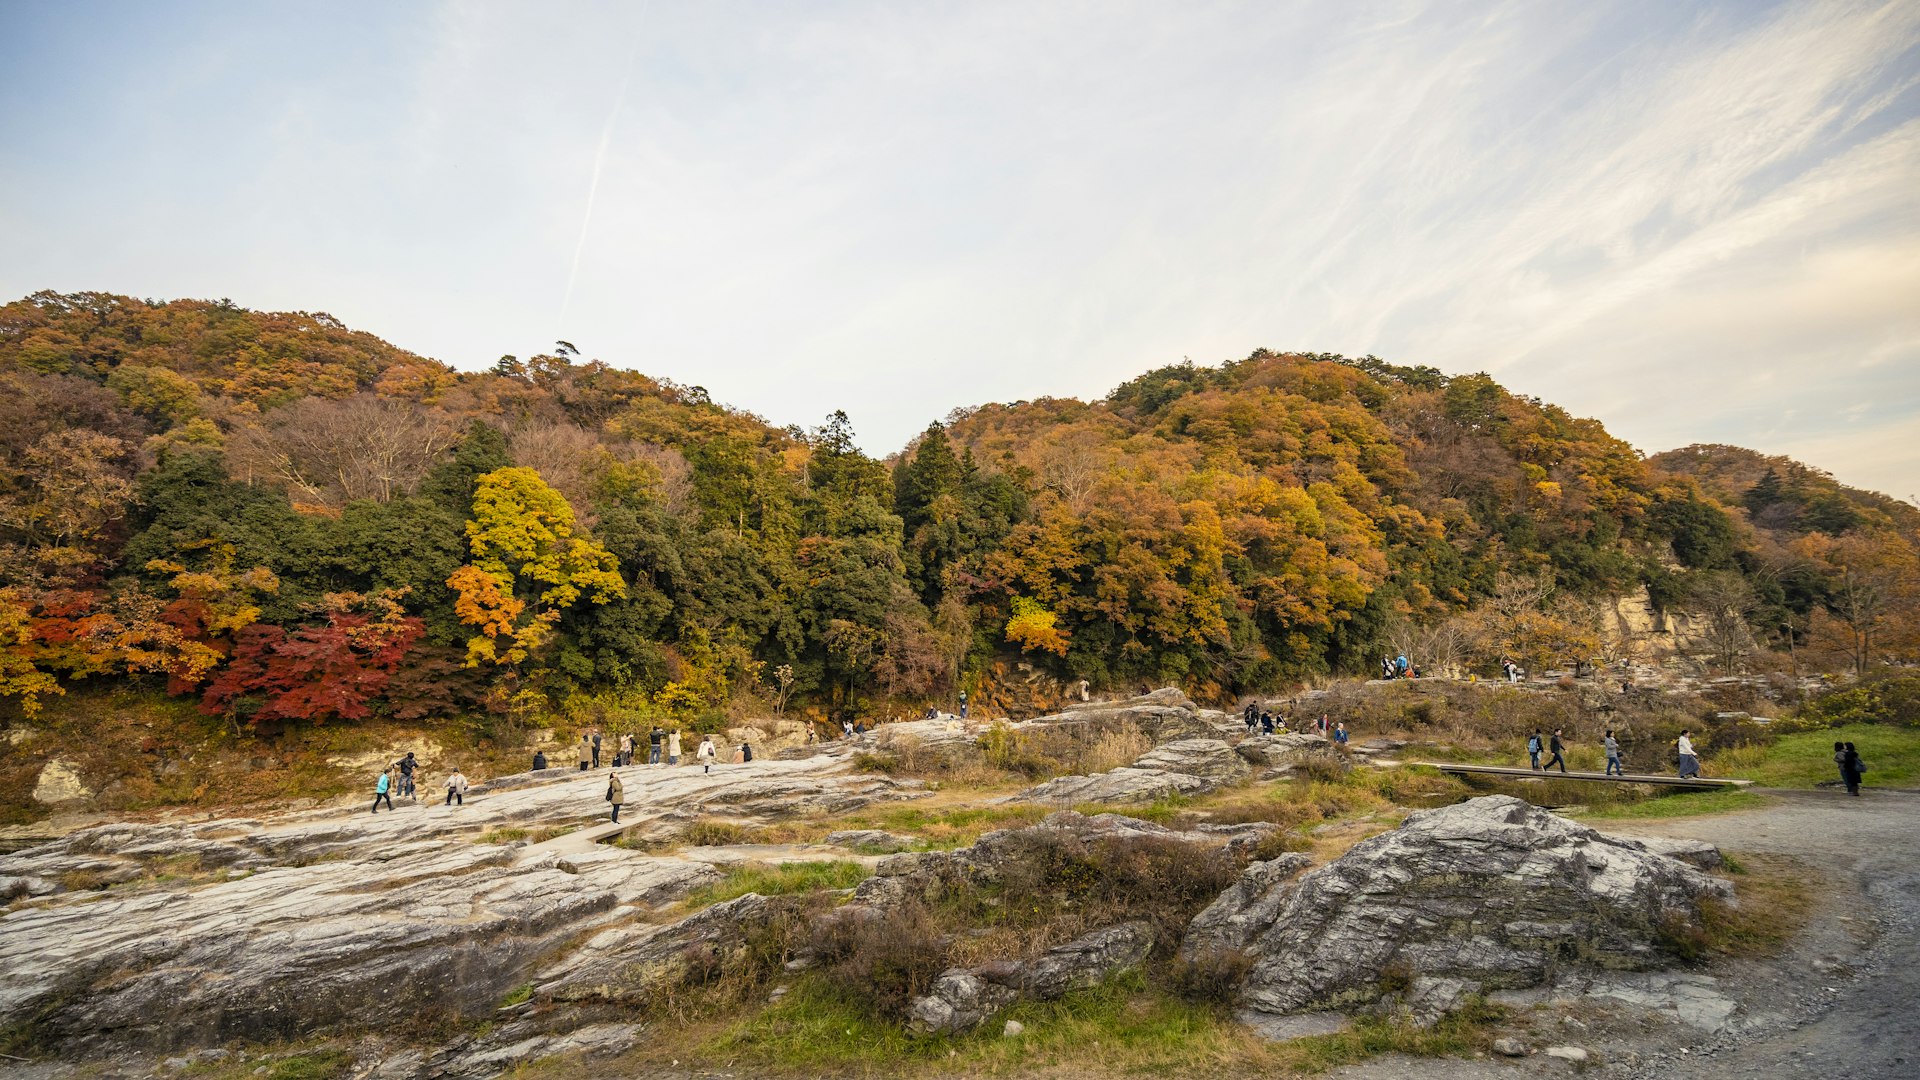 People hiking across rocky terrain with a backdrop of autumnal foliage